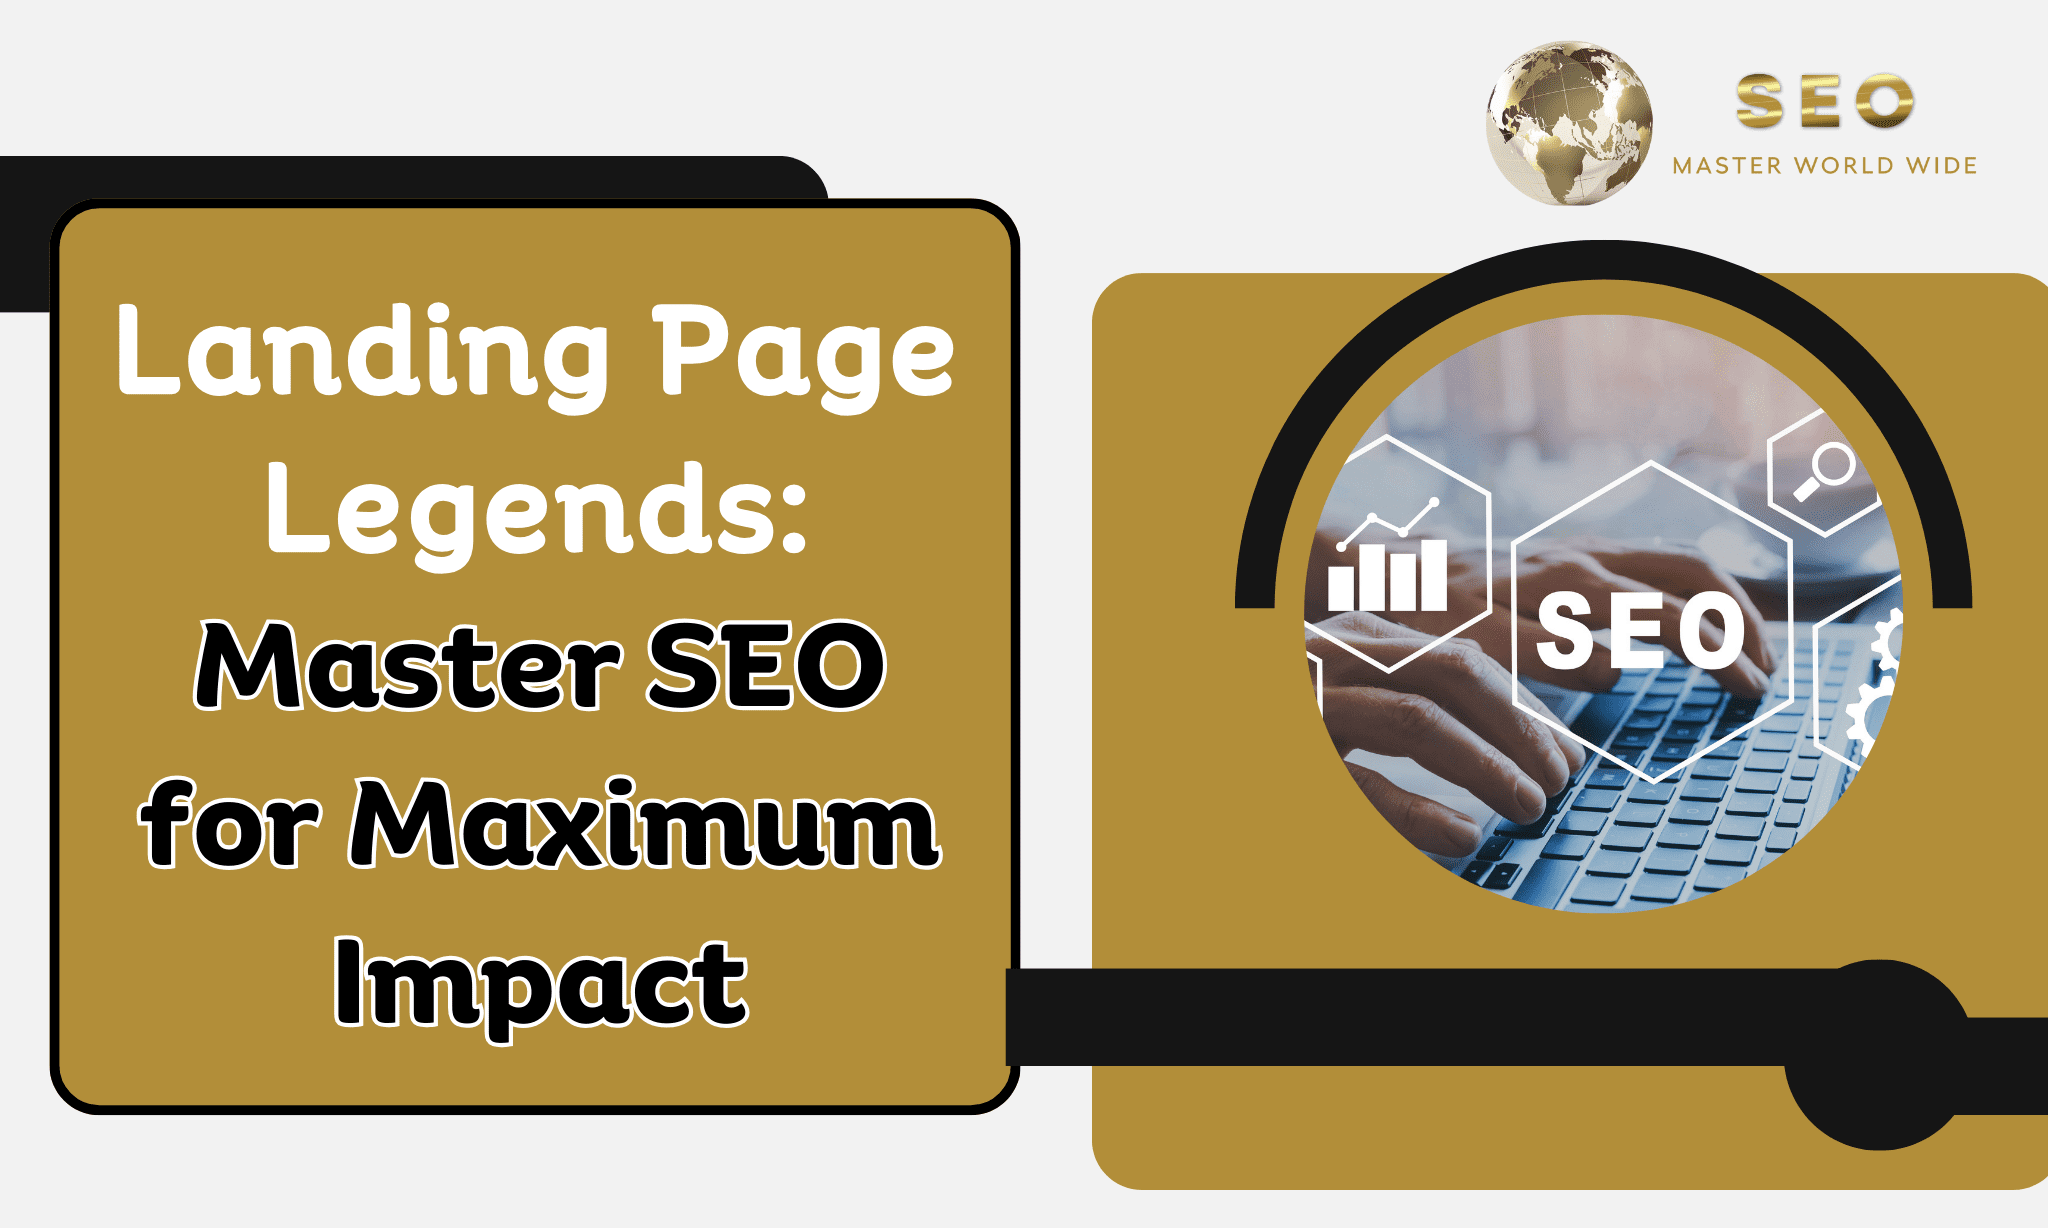 SEO Master Worldwide - SEO Services_landing page seo best practices